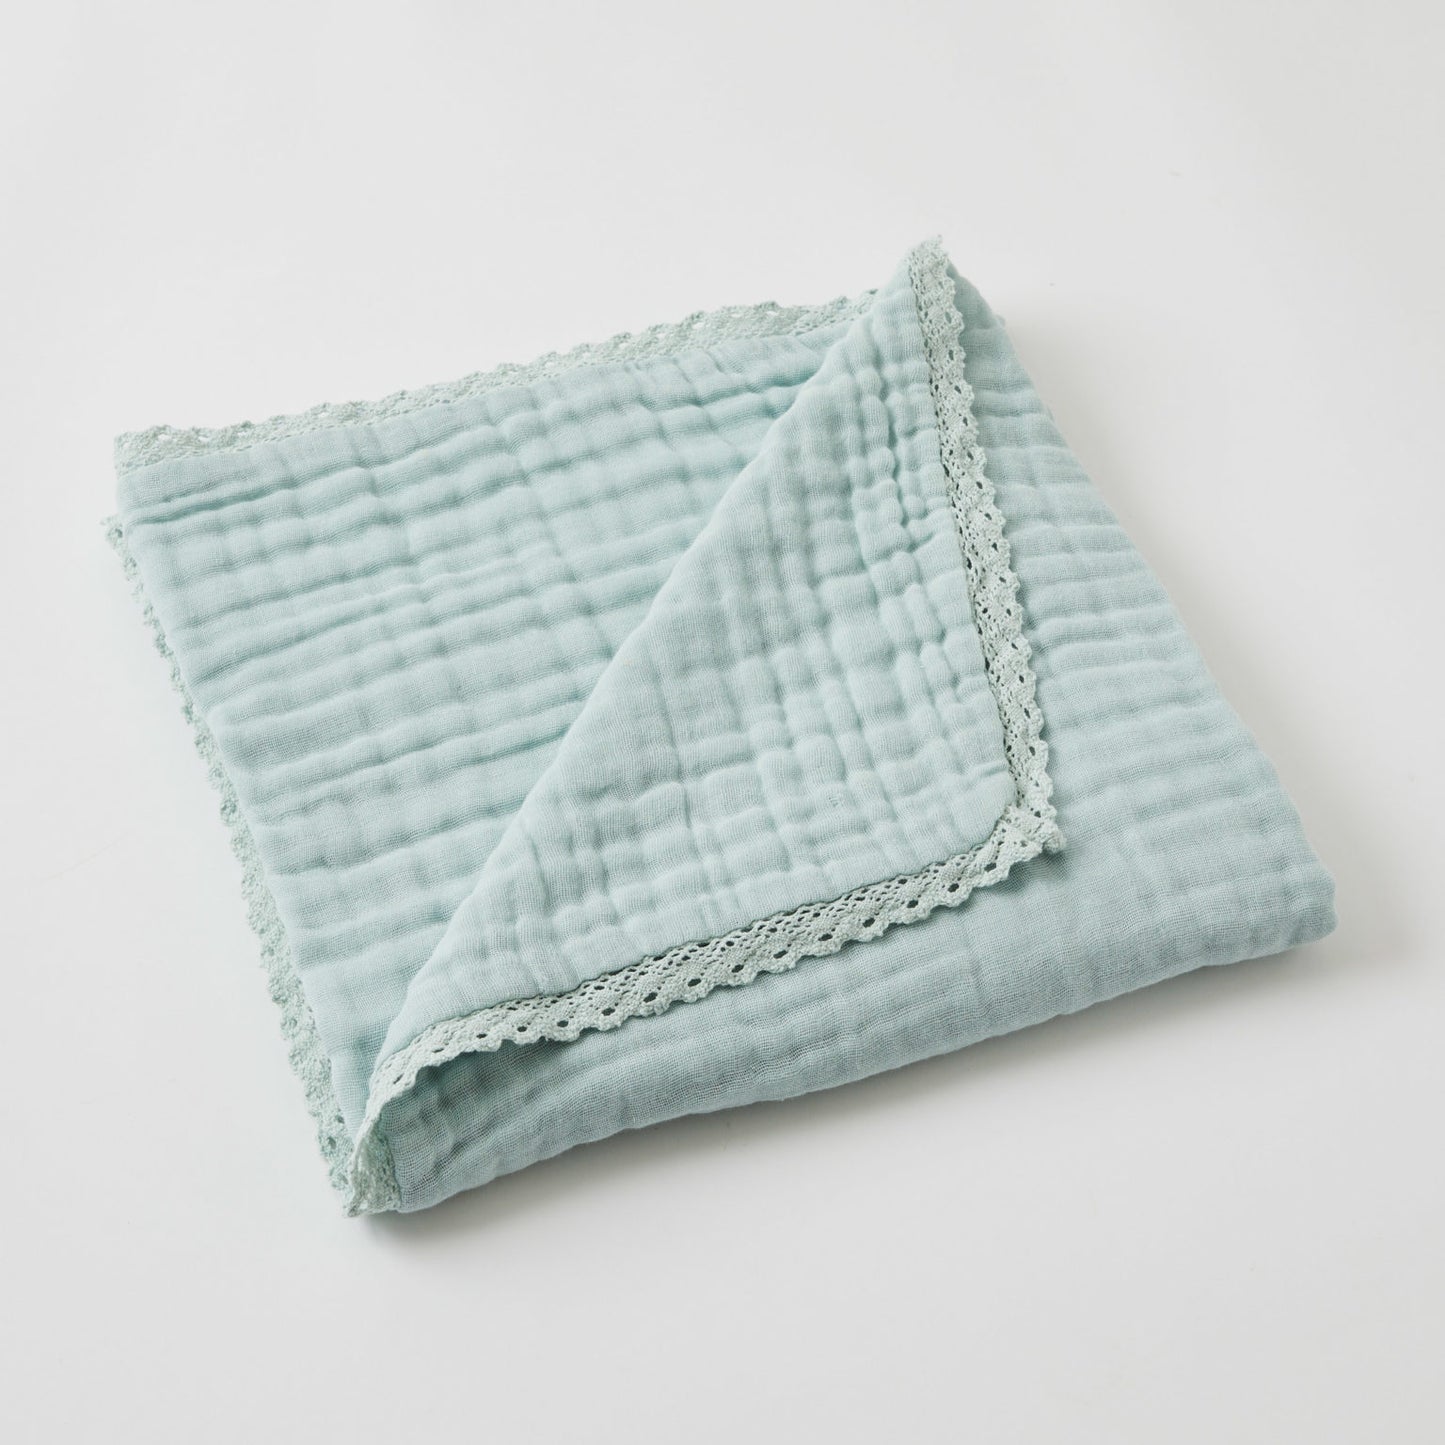 Misty Blanket with Lace Edge | Misty Blue